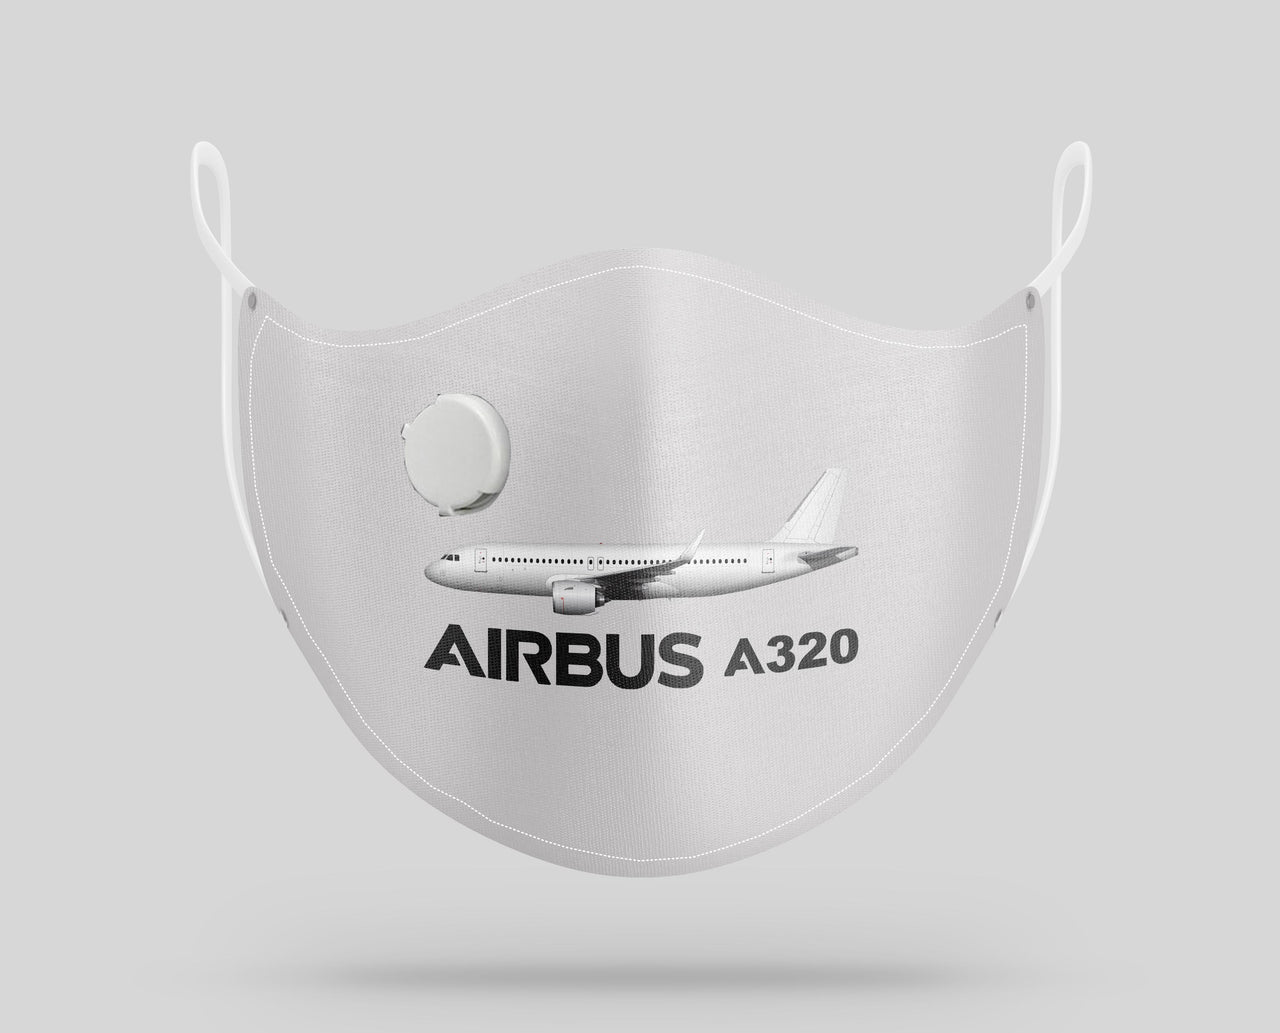 The Airbus A320 Designed Face Masks